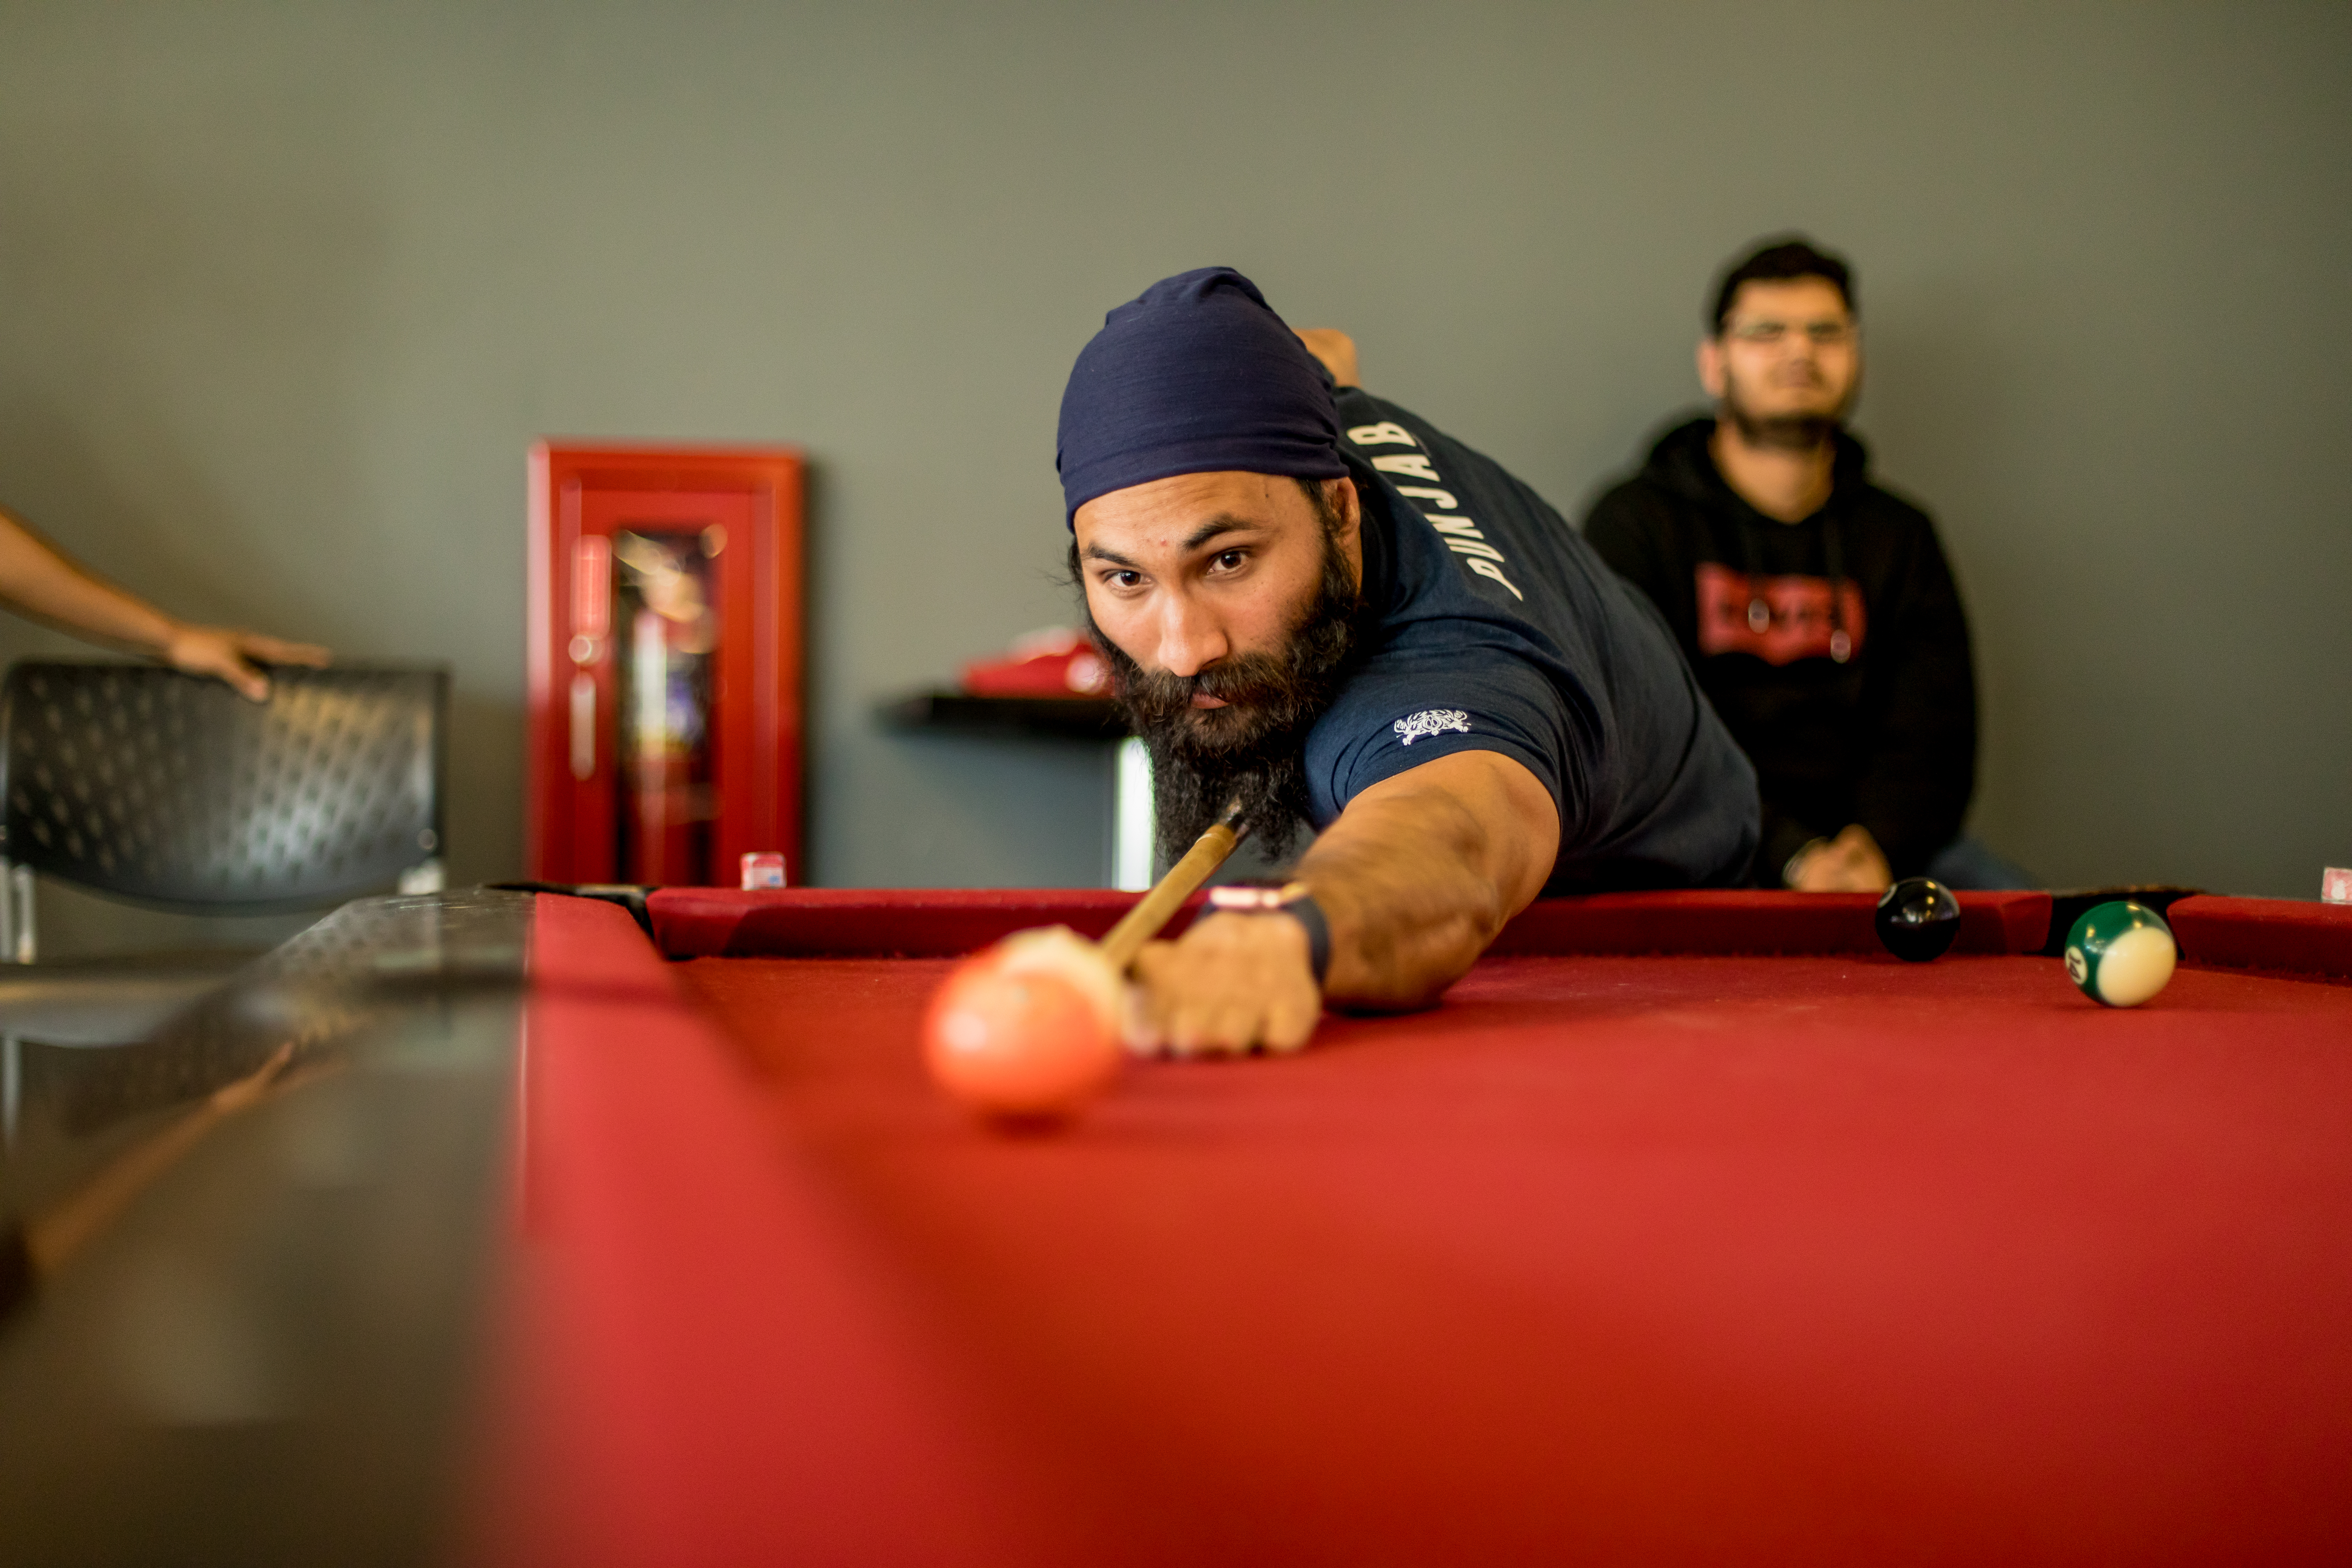 Students playing pool